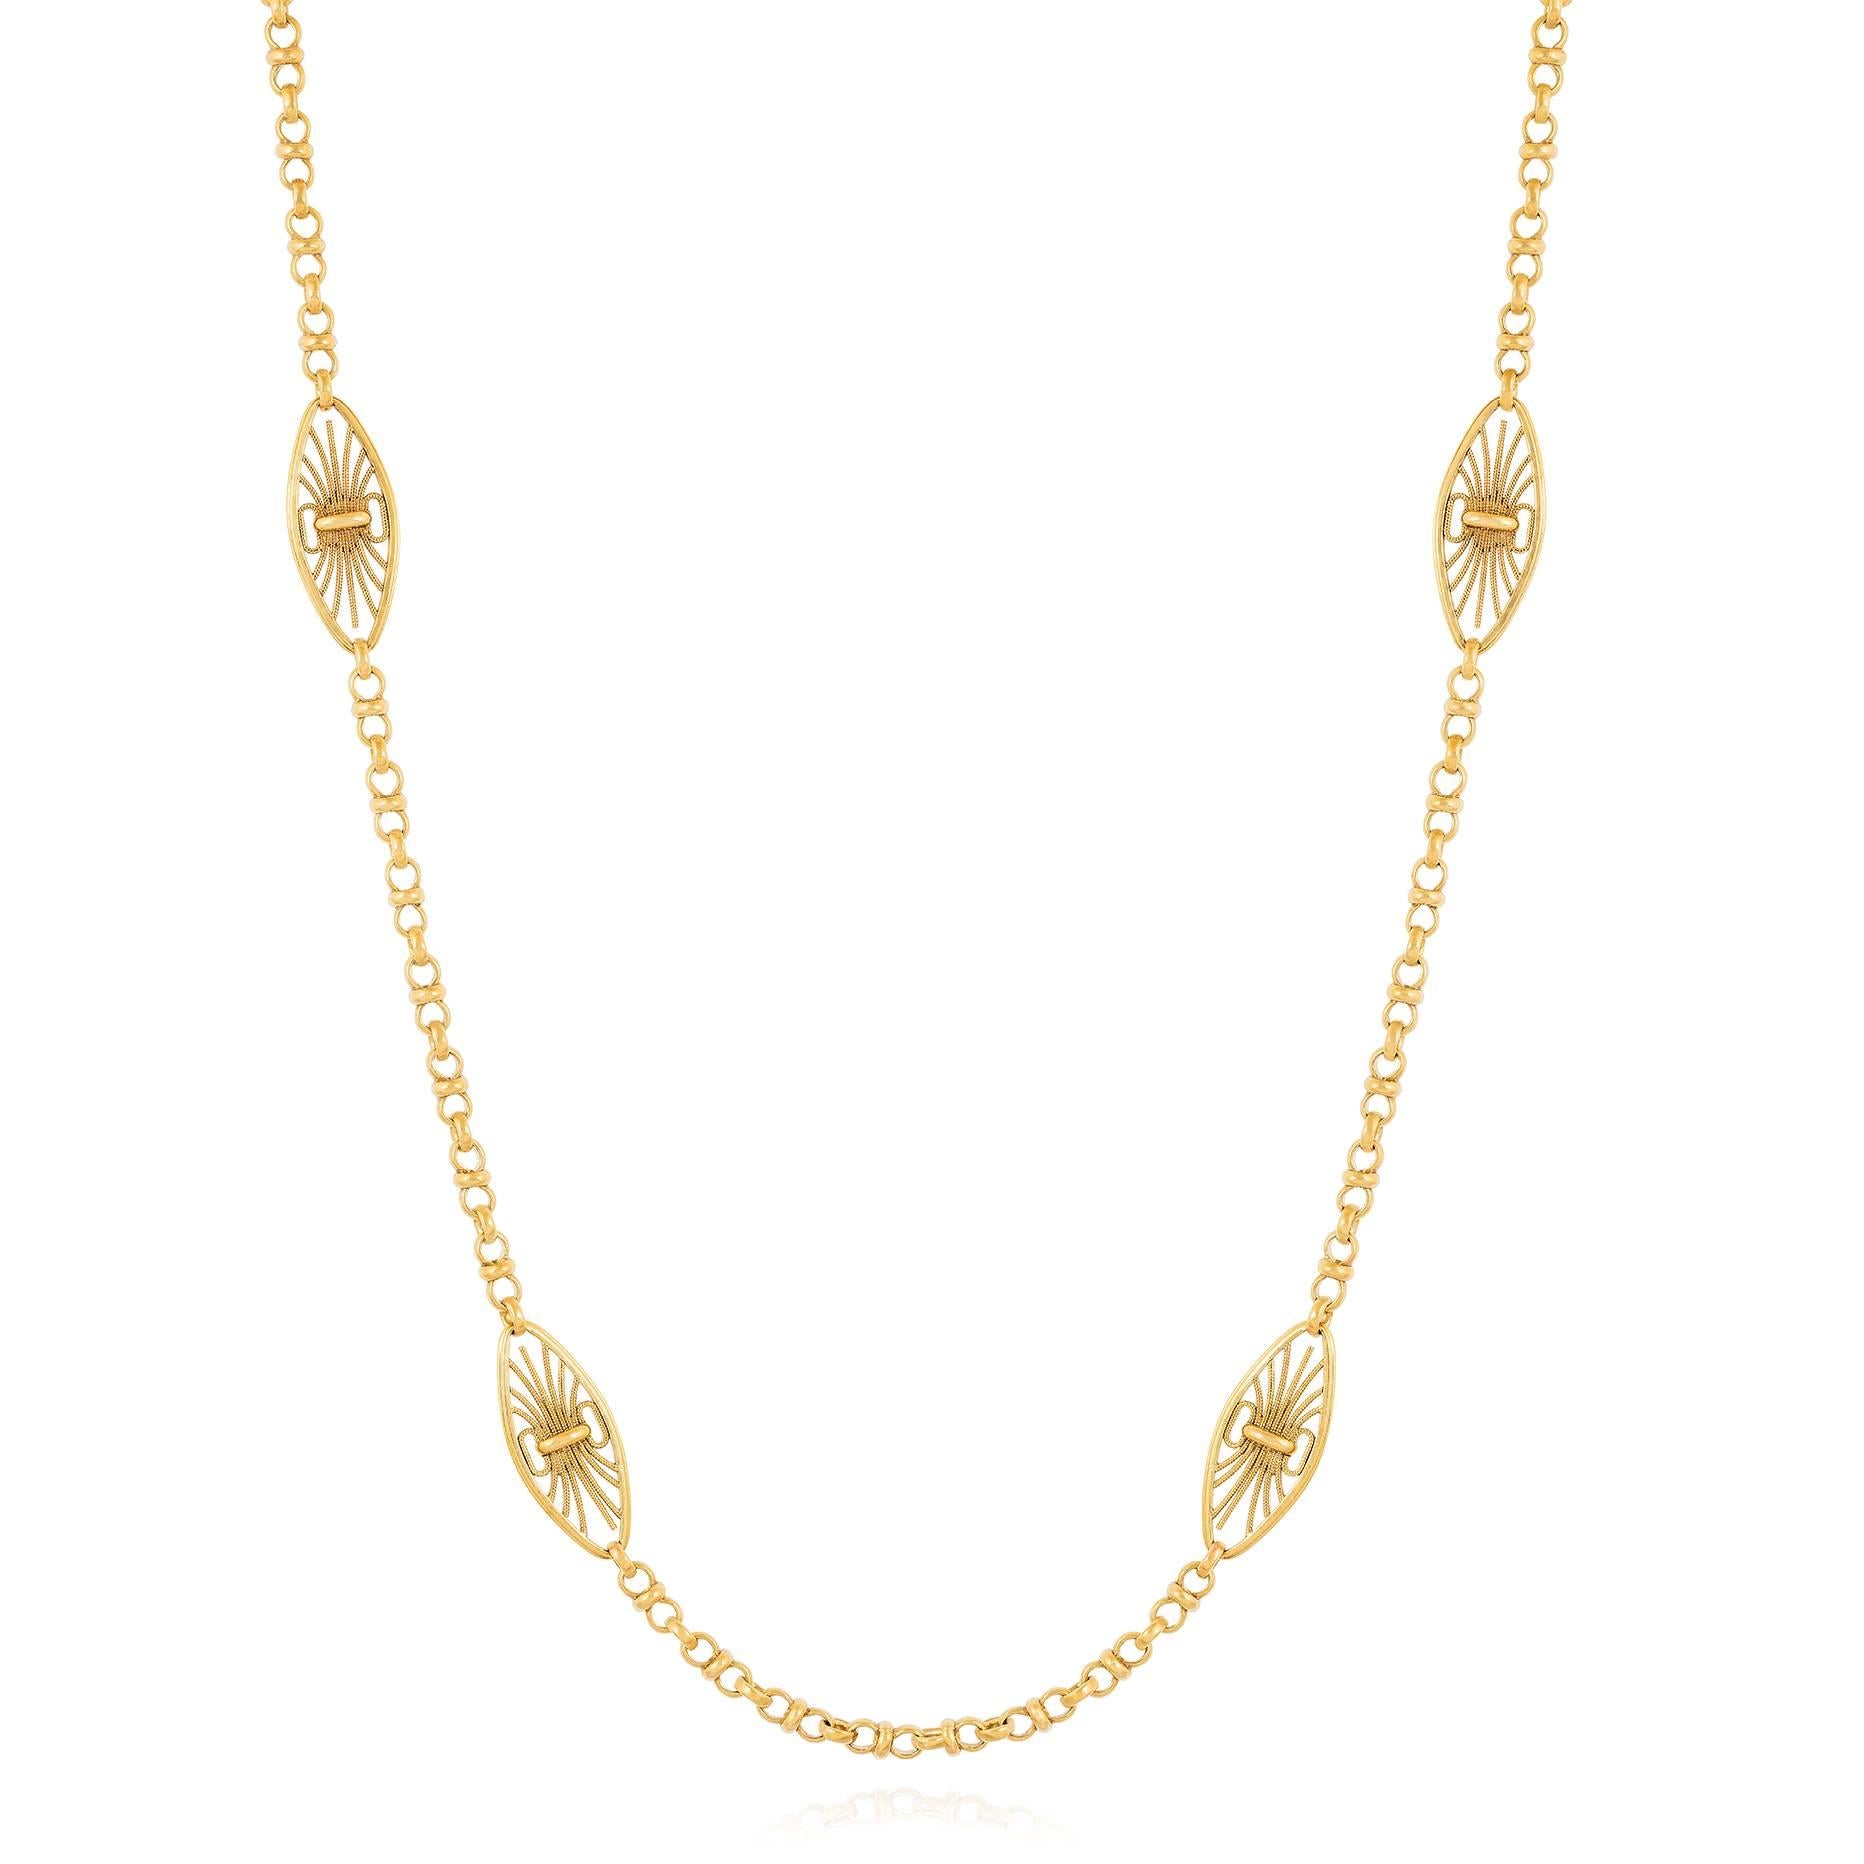 Antique French Gold Chain